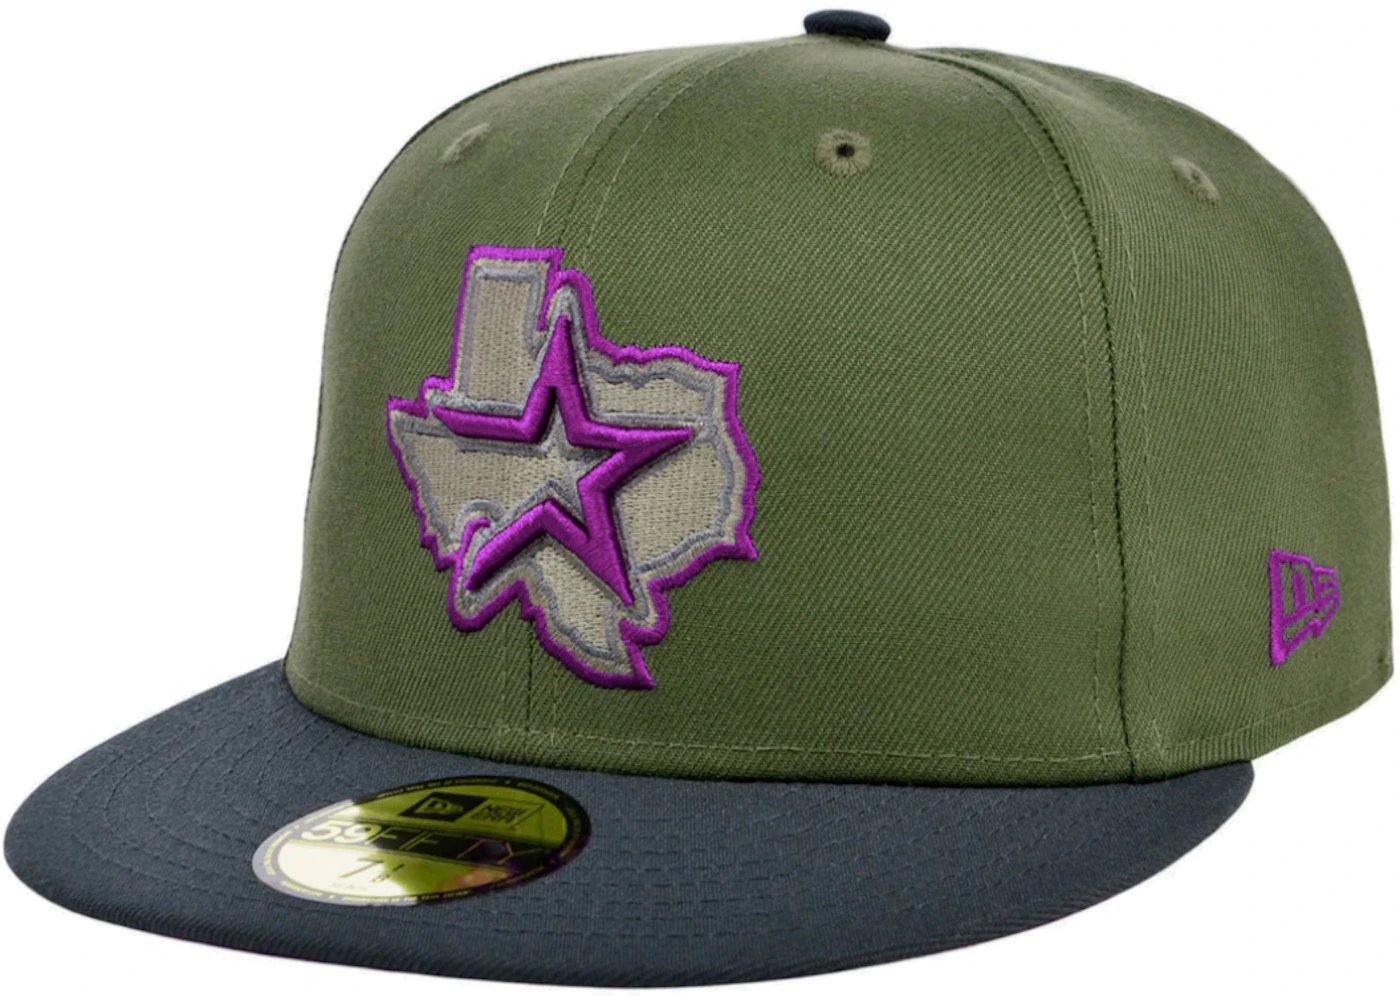 New Era x Lids HD Houston Astros 59Fifty Fitted Hat Mossy Haze